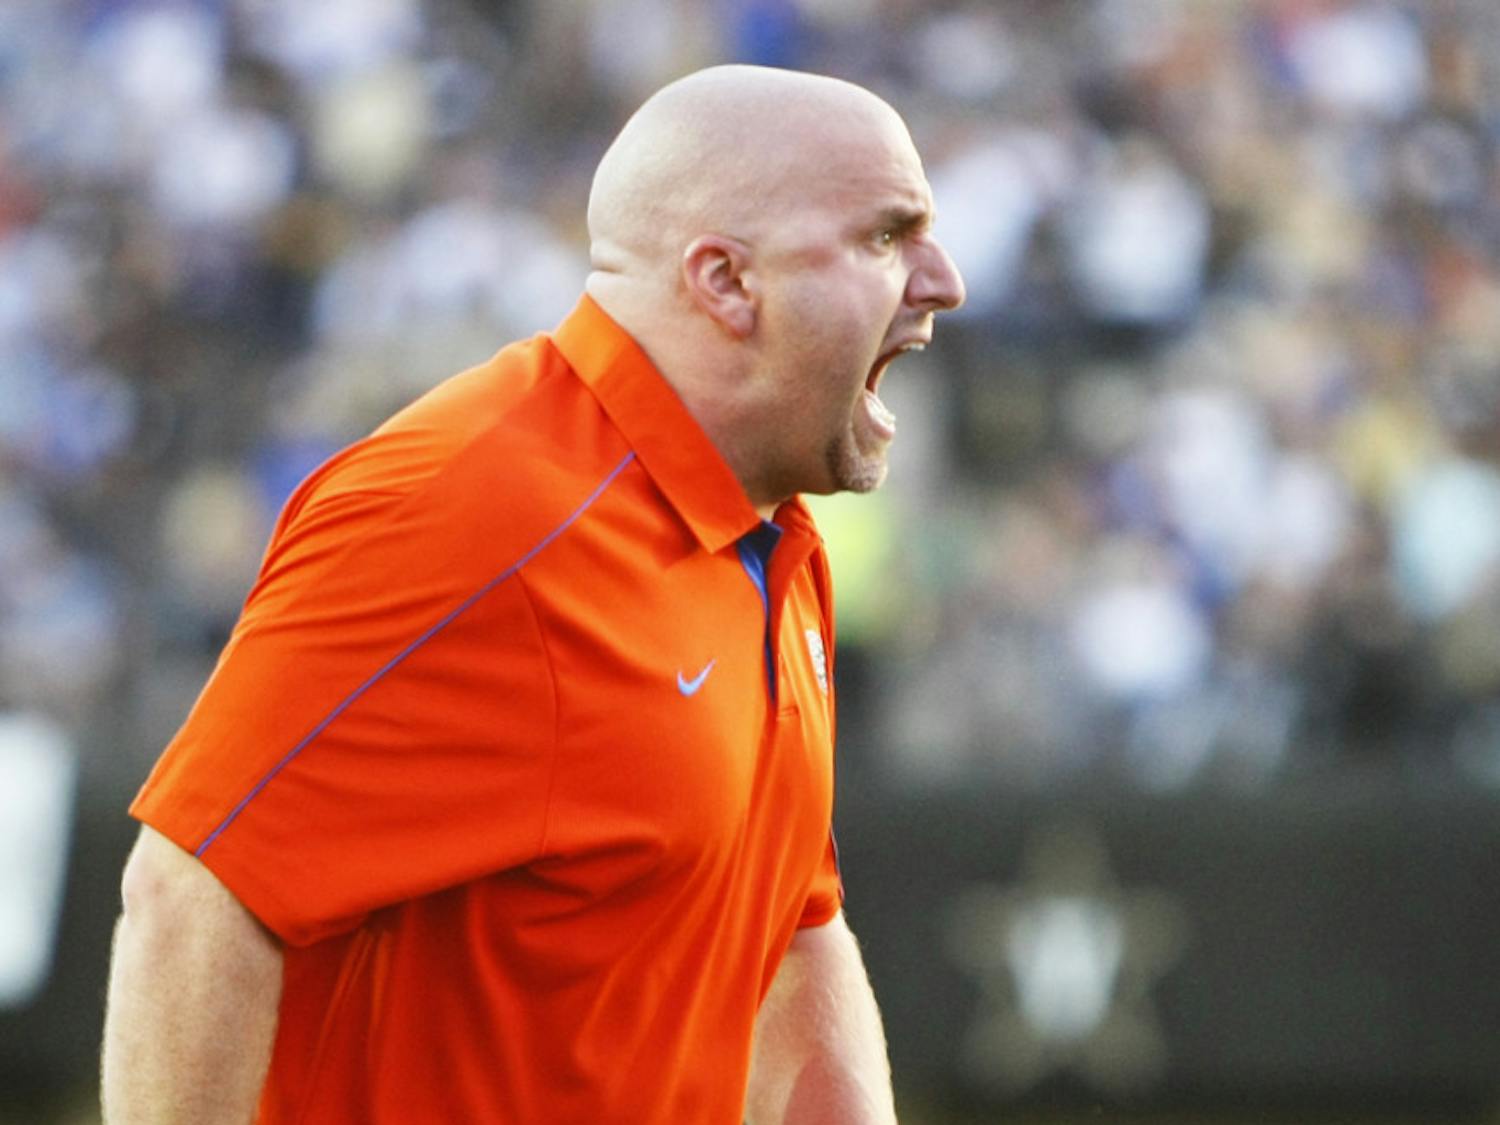 Strength coach Jeff Dillman brings a fiery attitude to the Gators football team. Florida has transformed from the "soft" team Gators coach Will Muschamp described at the end of last season to a team with three second-half comebacks this year.